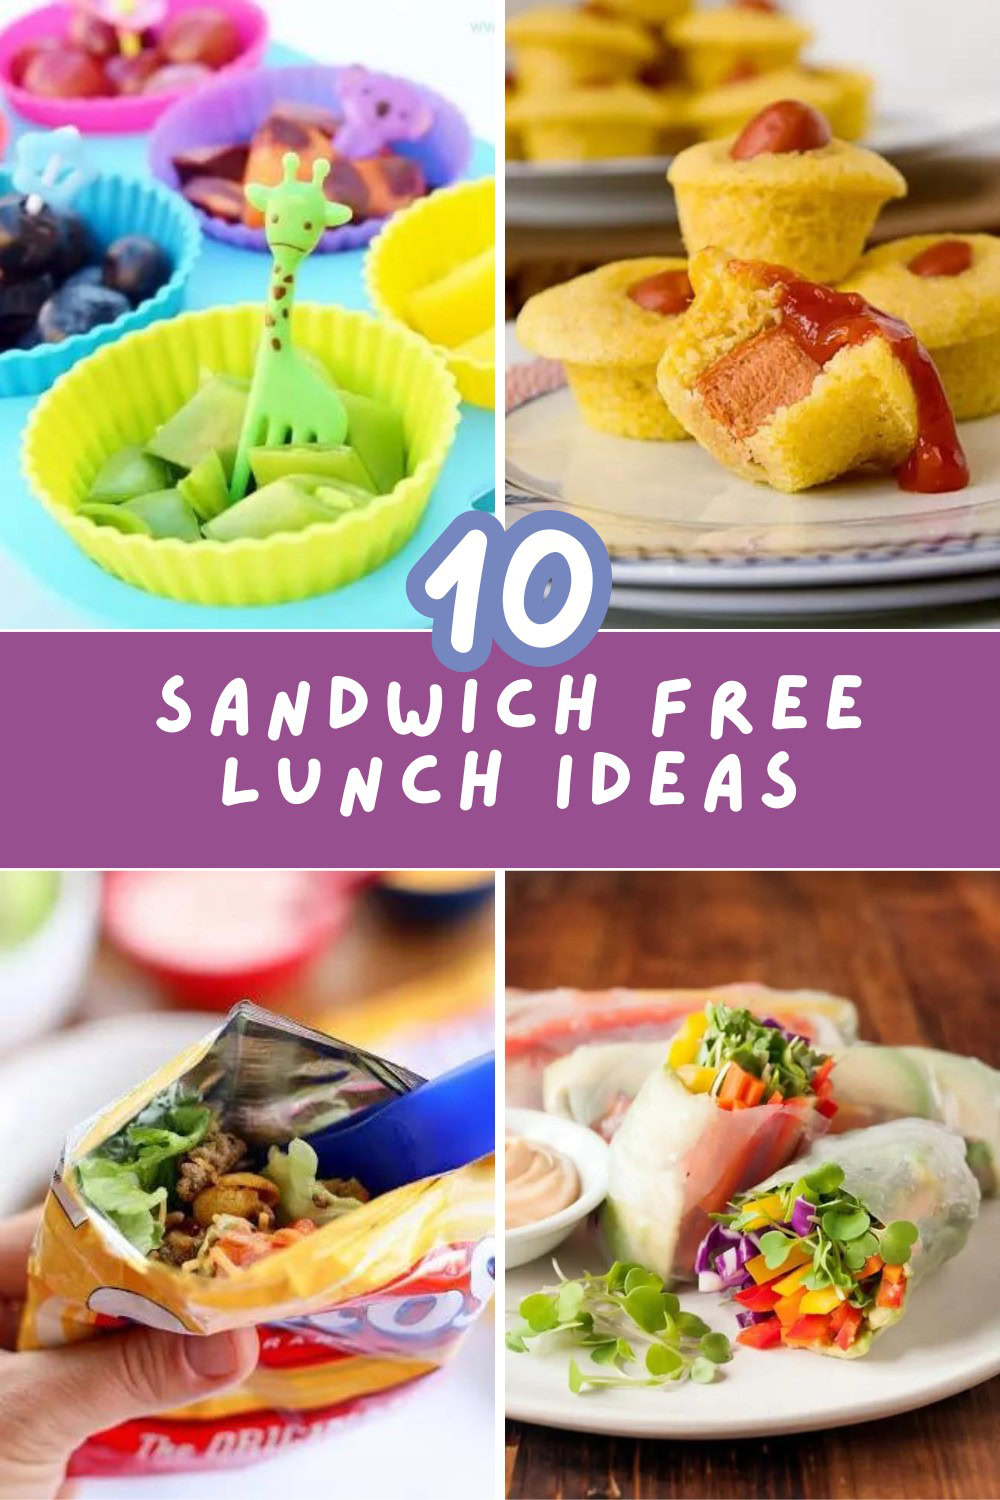 Break free from the sandwich rut with these 10 healthy and delicious lunch box alternatives! Perfect for the whole family, these ideas are tasty, nutritious, and easy to prepare. Say hello to a fresh and exciting lunch experience! 🥗🍇 #HealthyRecipes #LunchIdeas #FamilyMeals